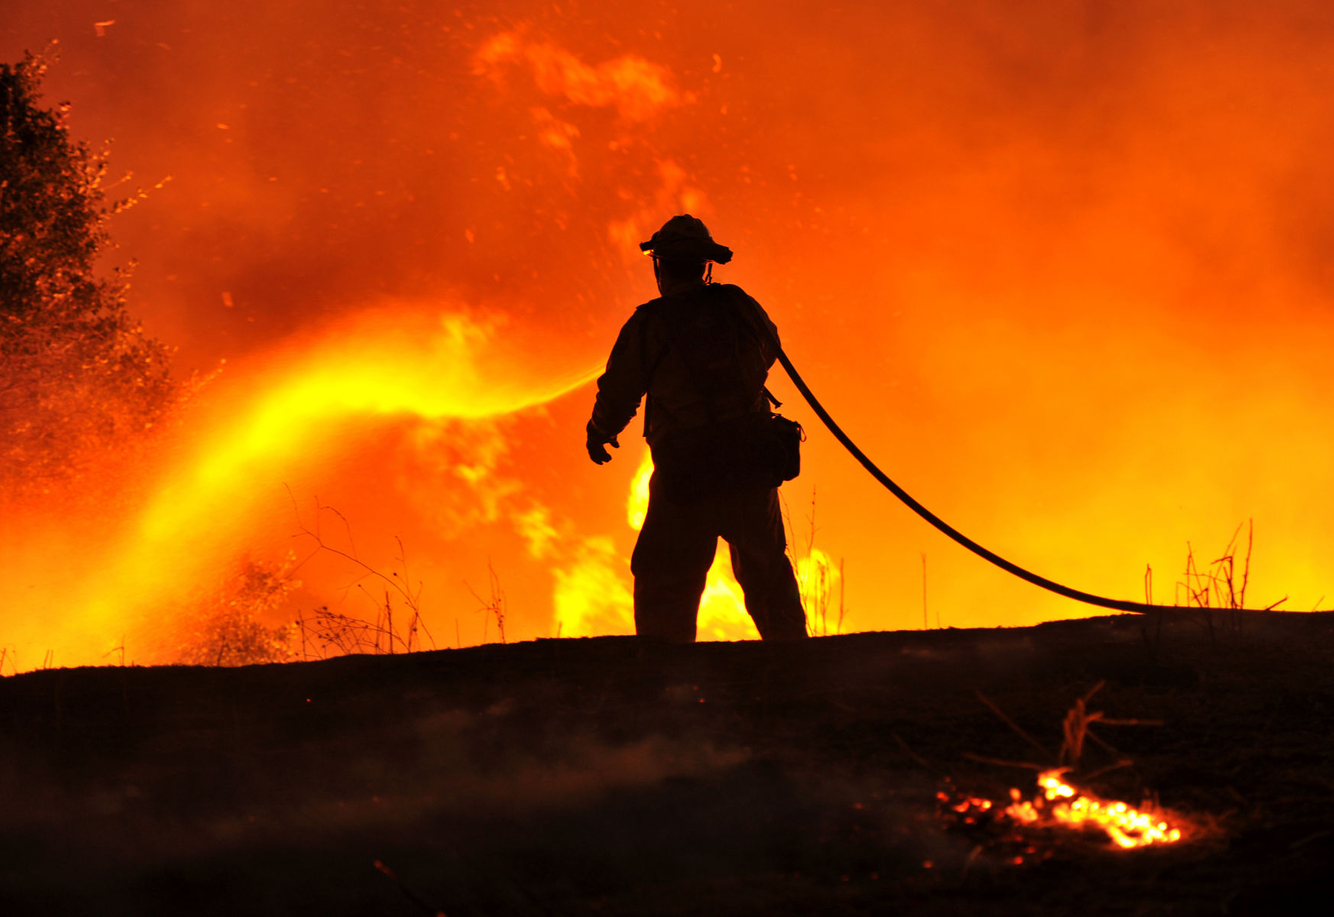 A lone firefighter sprays water on flames